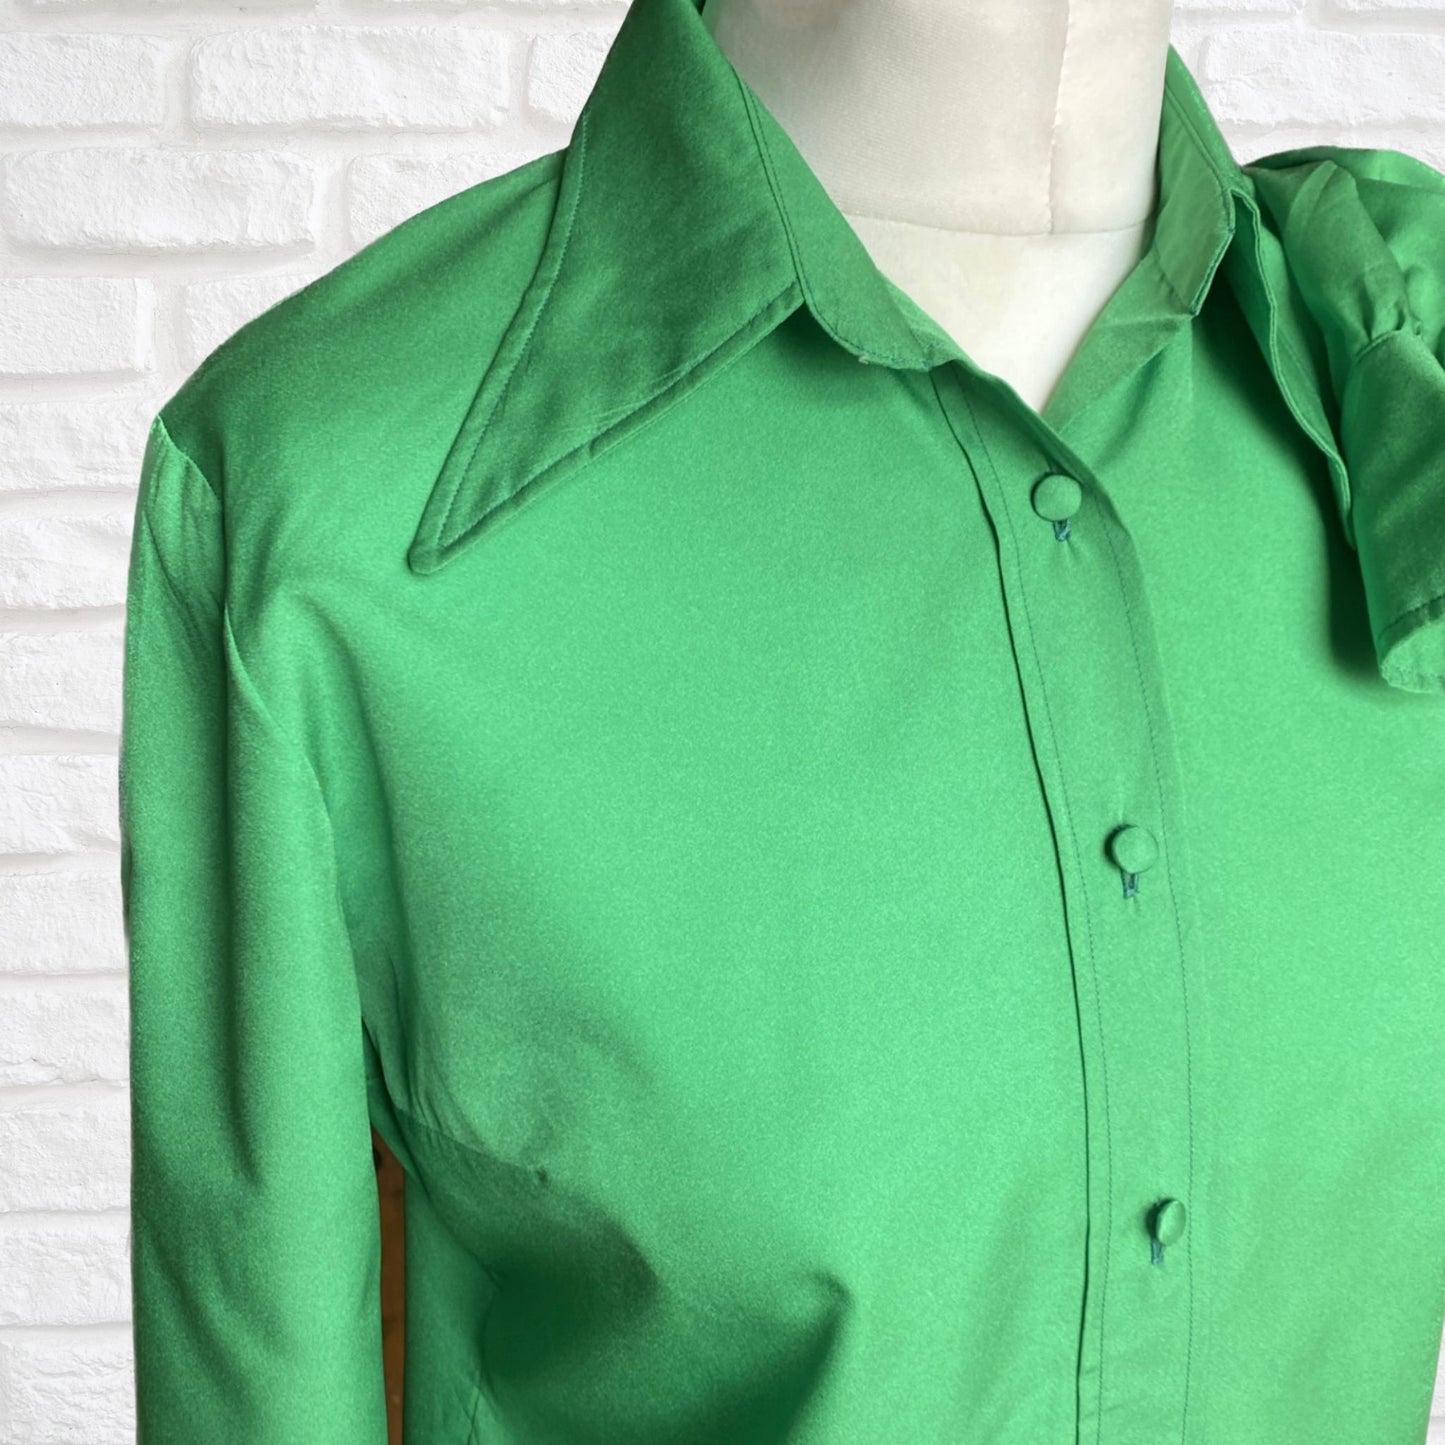 Vibrant green long sleeved 70s blouse. Approx UK size 10-14